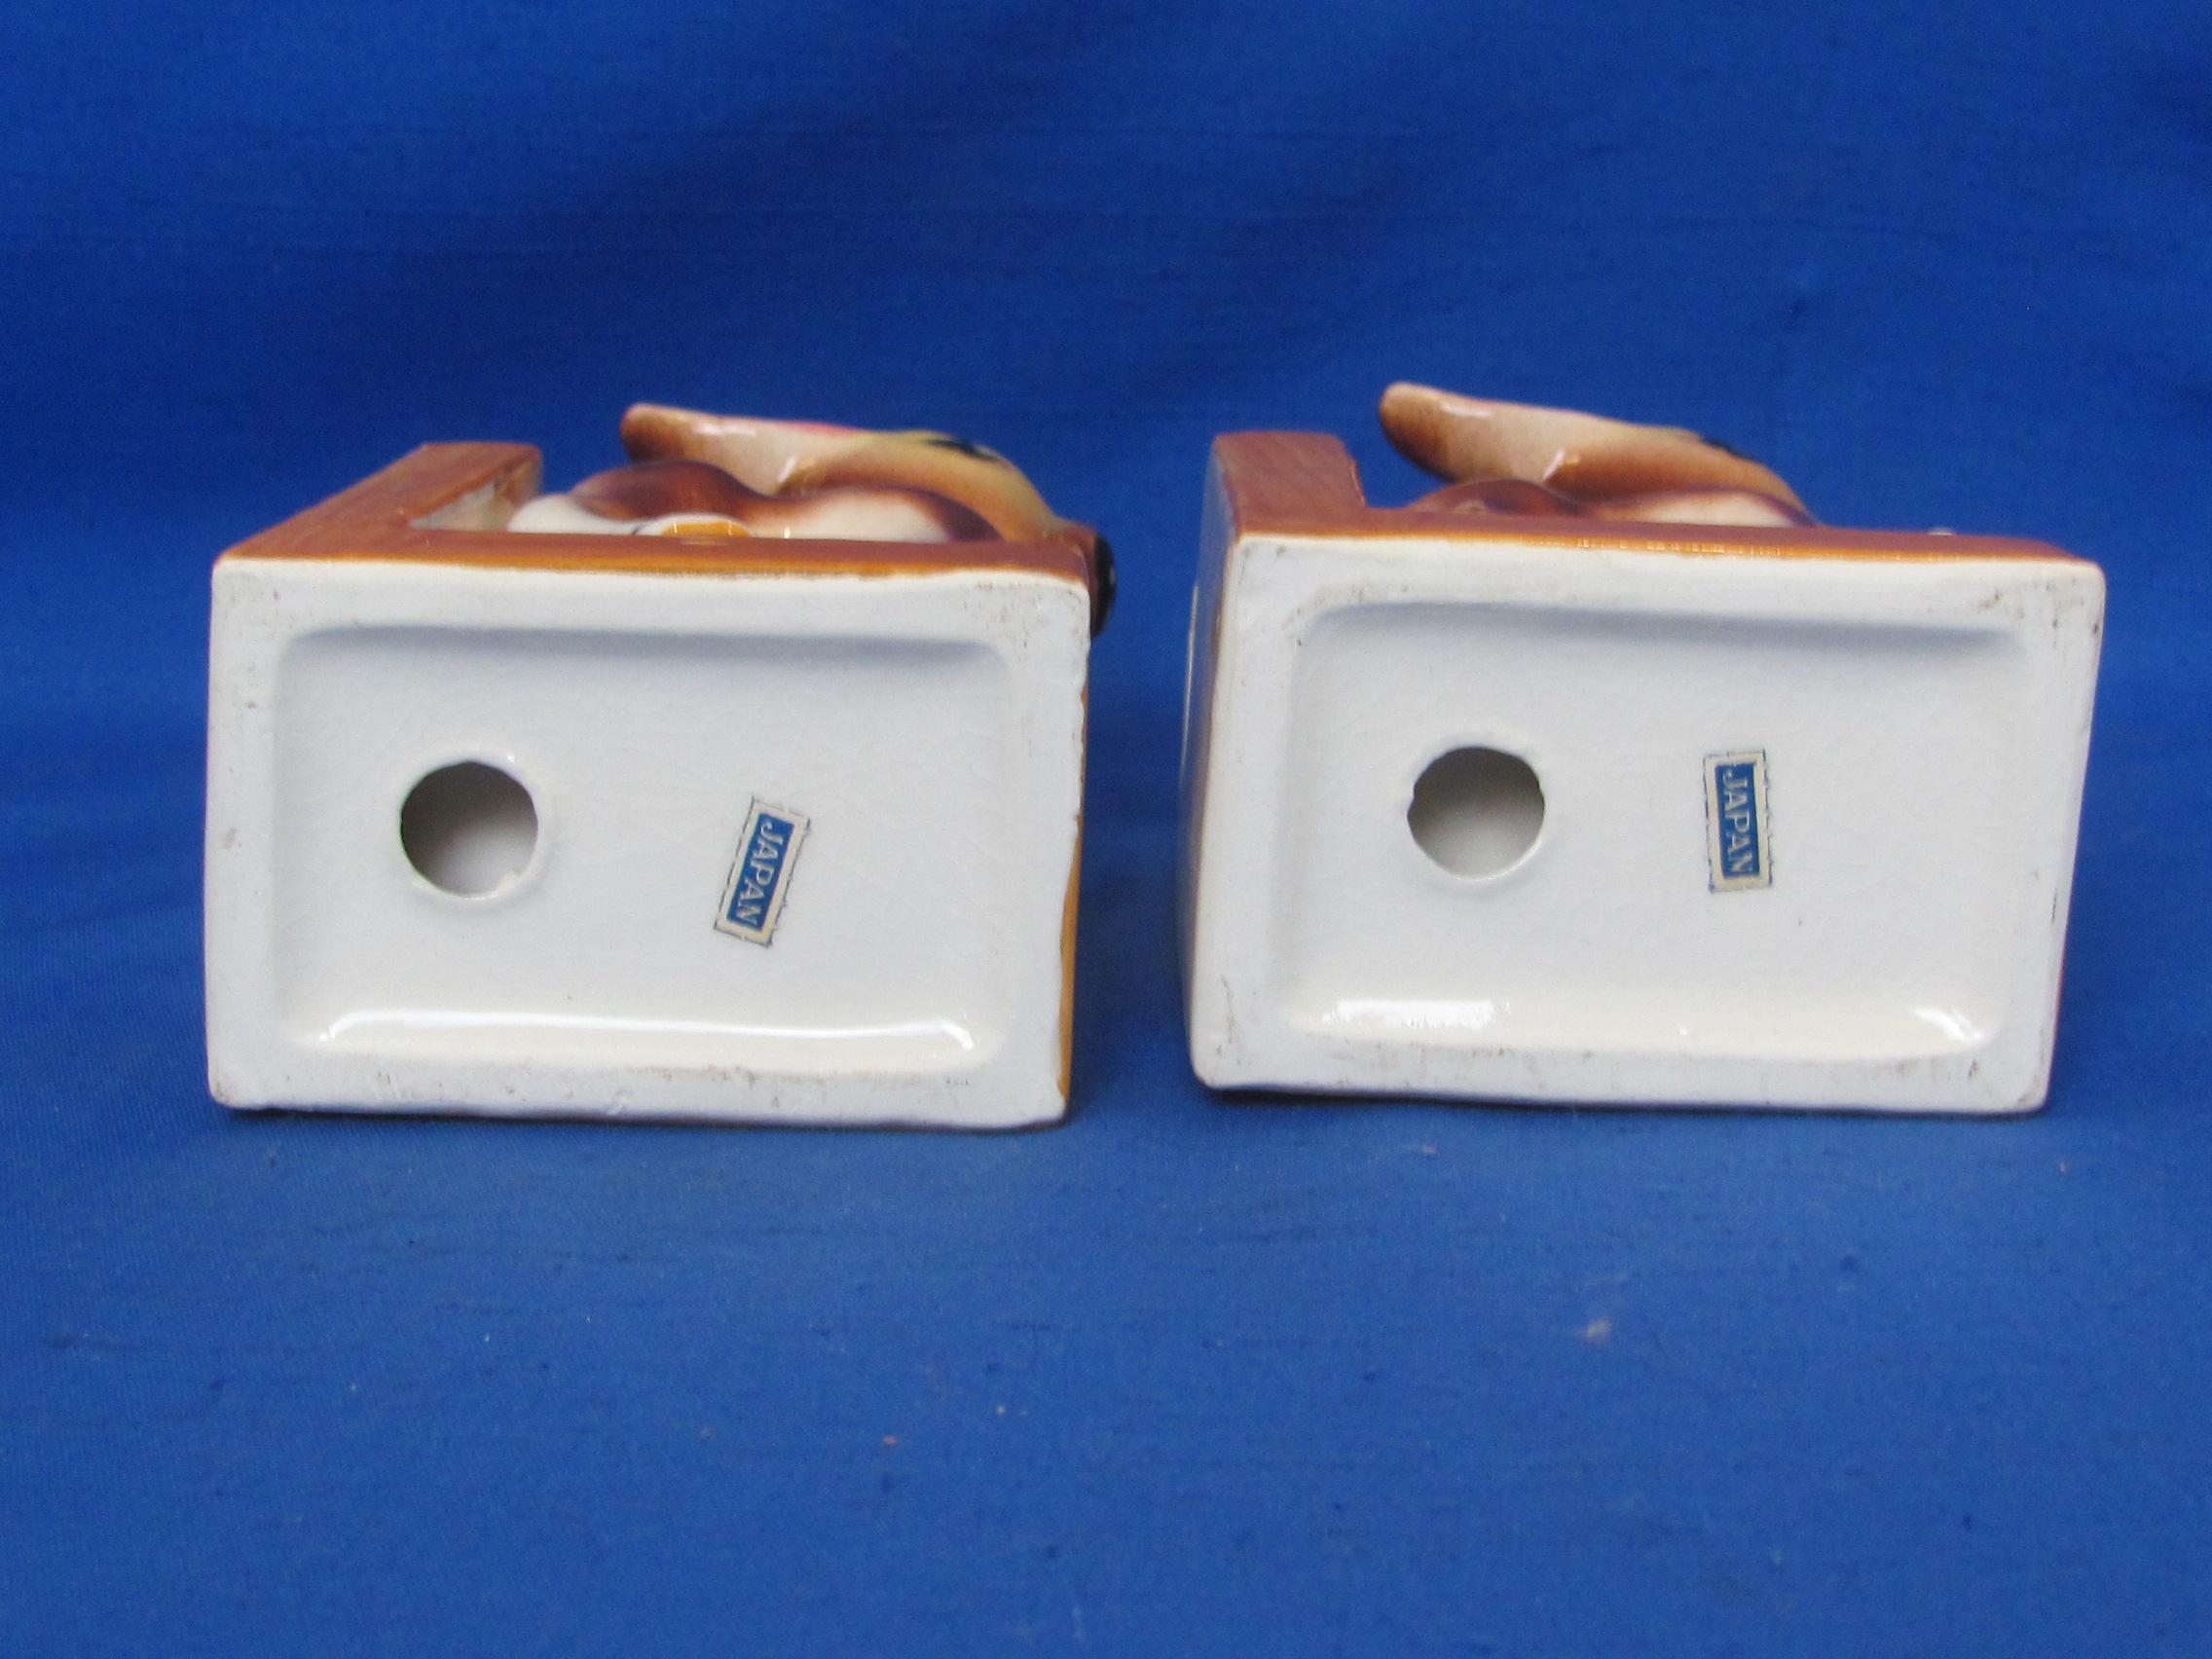 Cute Ceramic Bookends with Fawns/Deer – Made in Japan – 5 1/2” tall – Good vintage condition